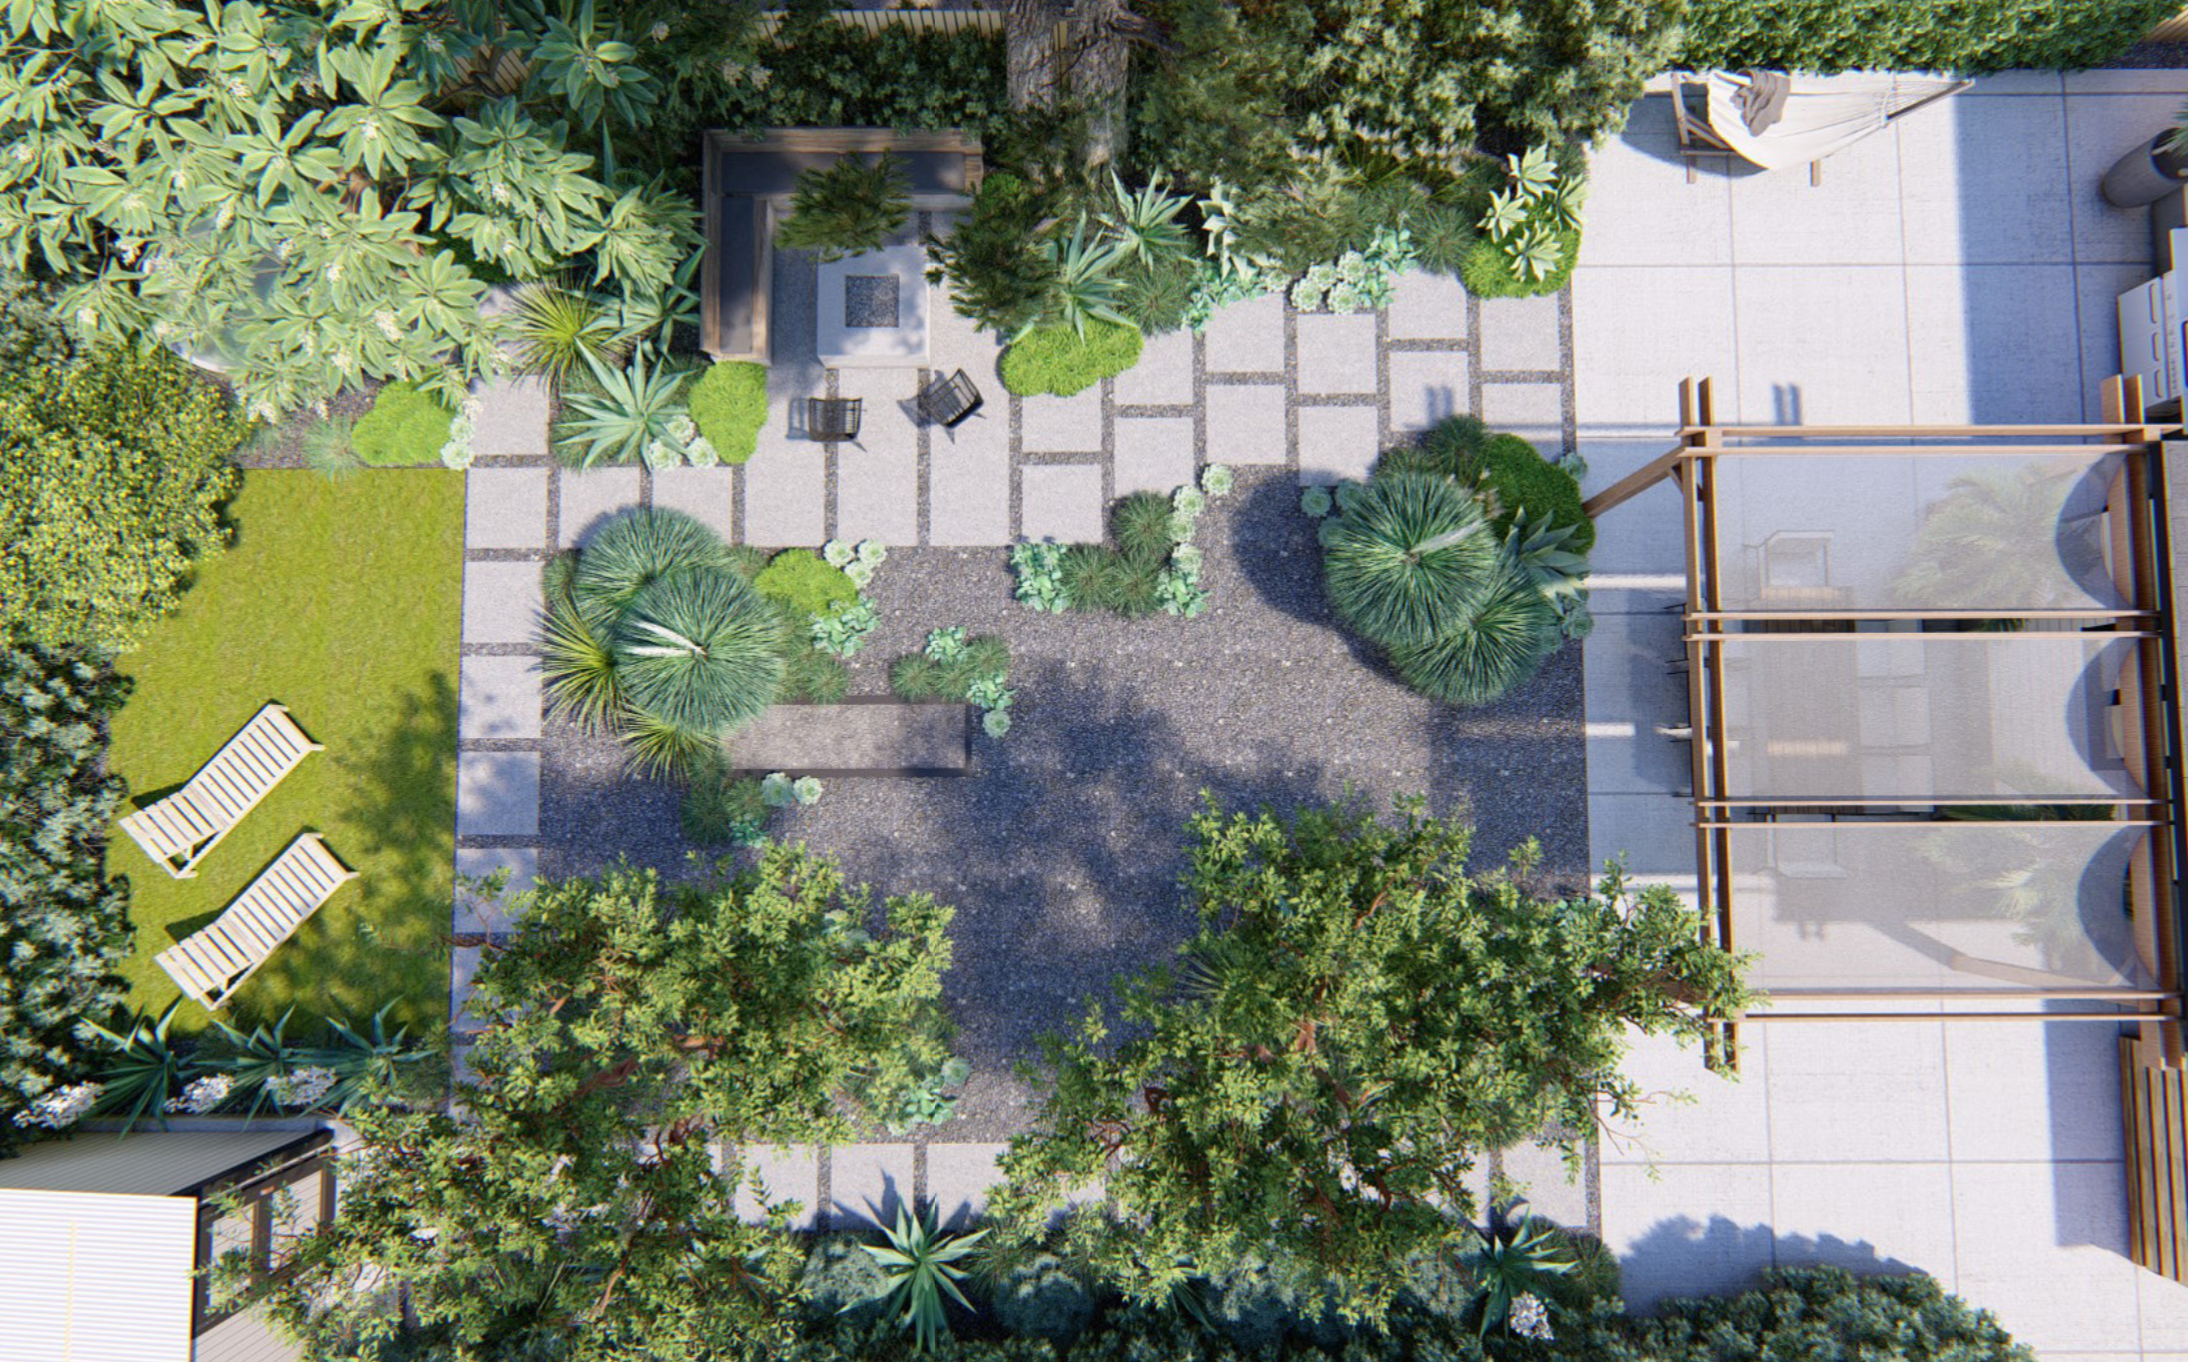 The bird’s-eye view of Saletnik and Vesely’s backyard shows how all the elements connect. Quarter-inch mixed beach pebble is used at the center of this space and also in between poured concrete pavers knitting the spaces together visually.